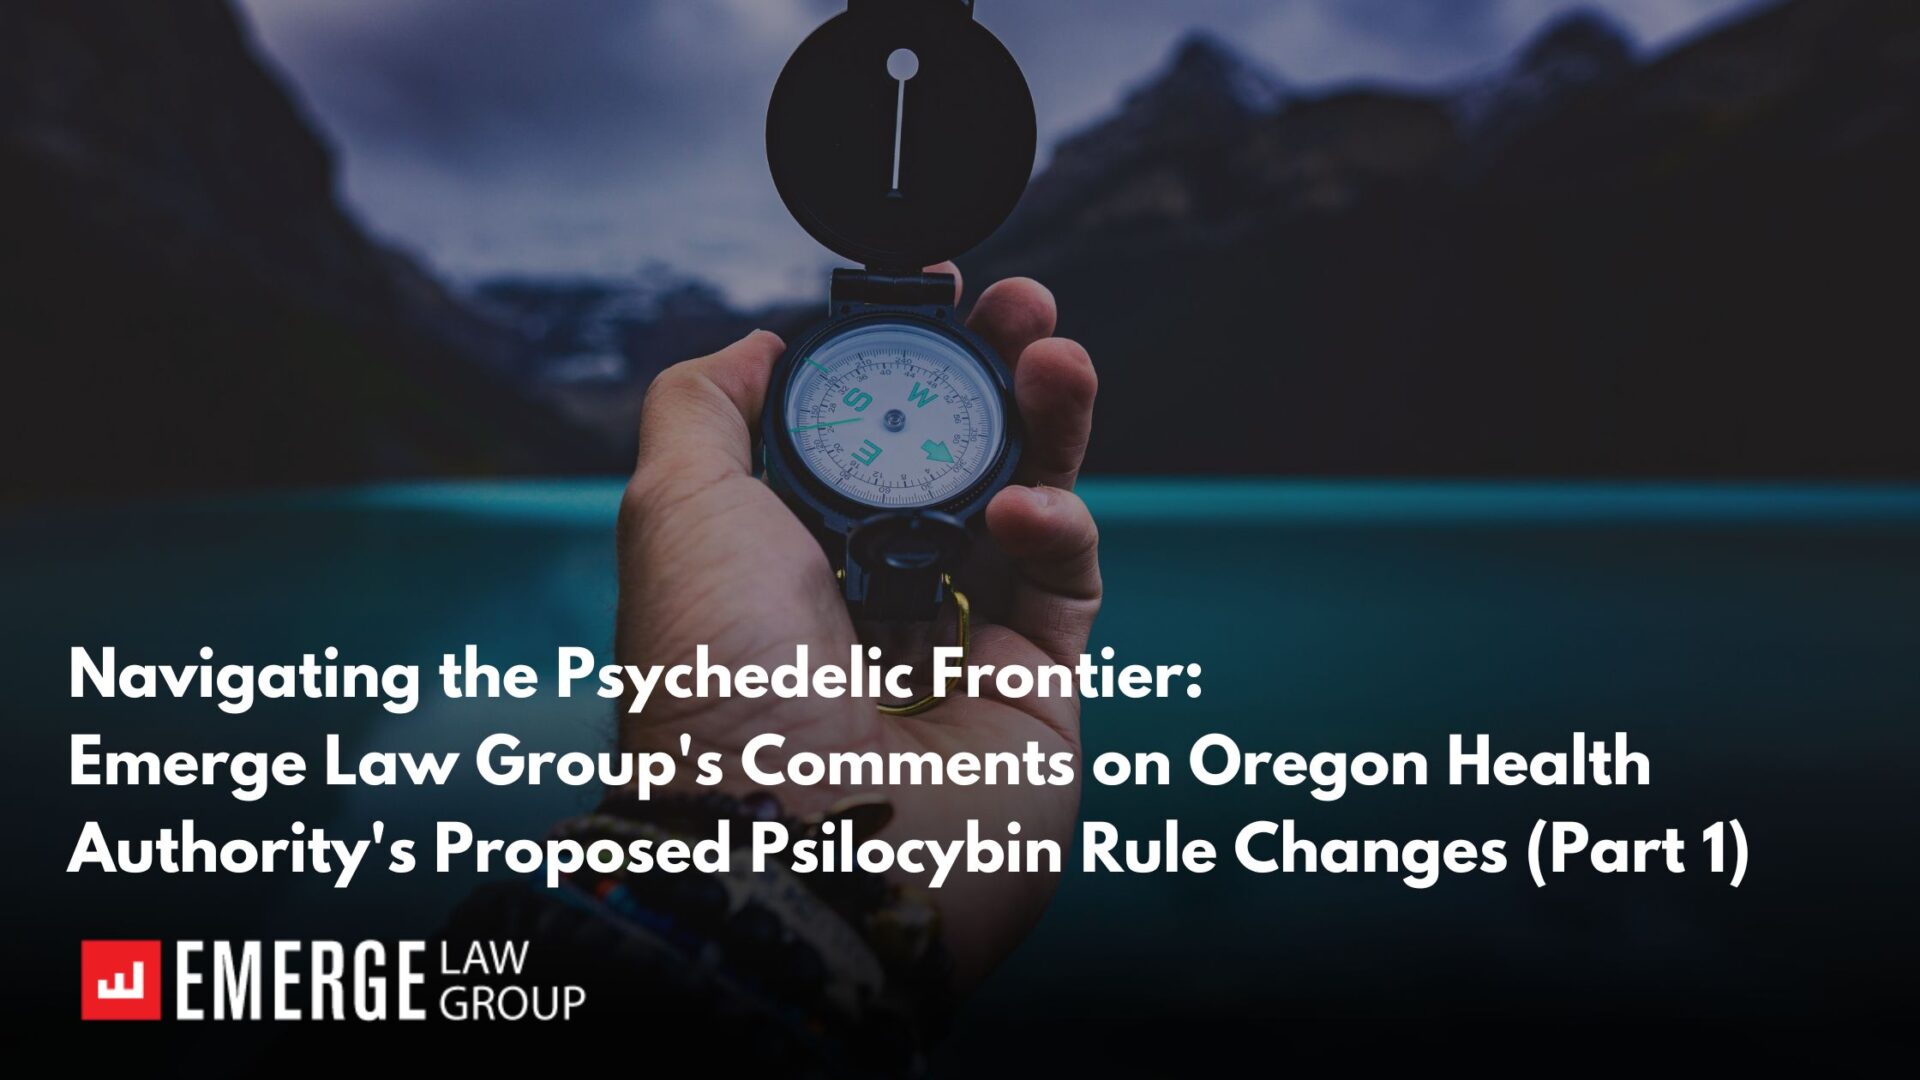 Navigating the Psychedelic Frontier: Emerge Law Group’s Comments on Oregon Health Authority’s Proposed Psilocybin Rule Changes (Part 1)